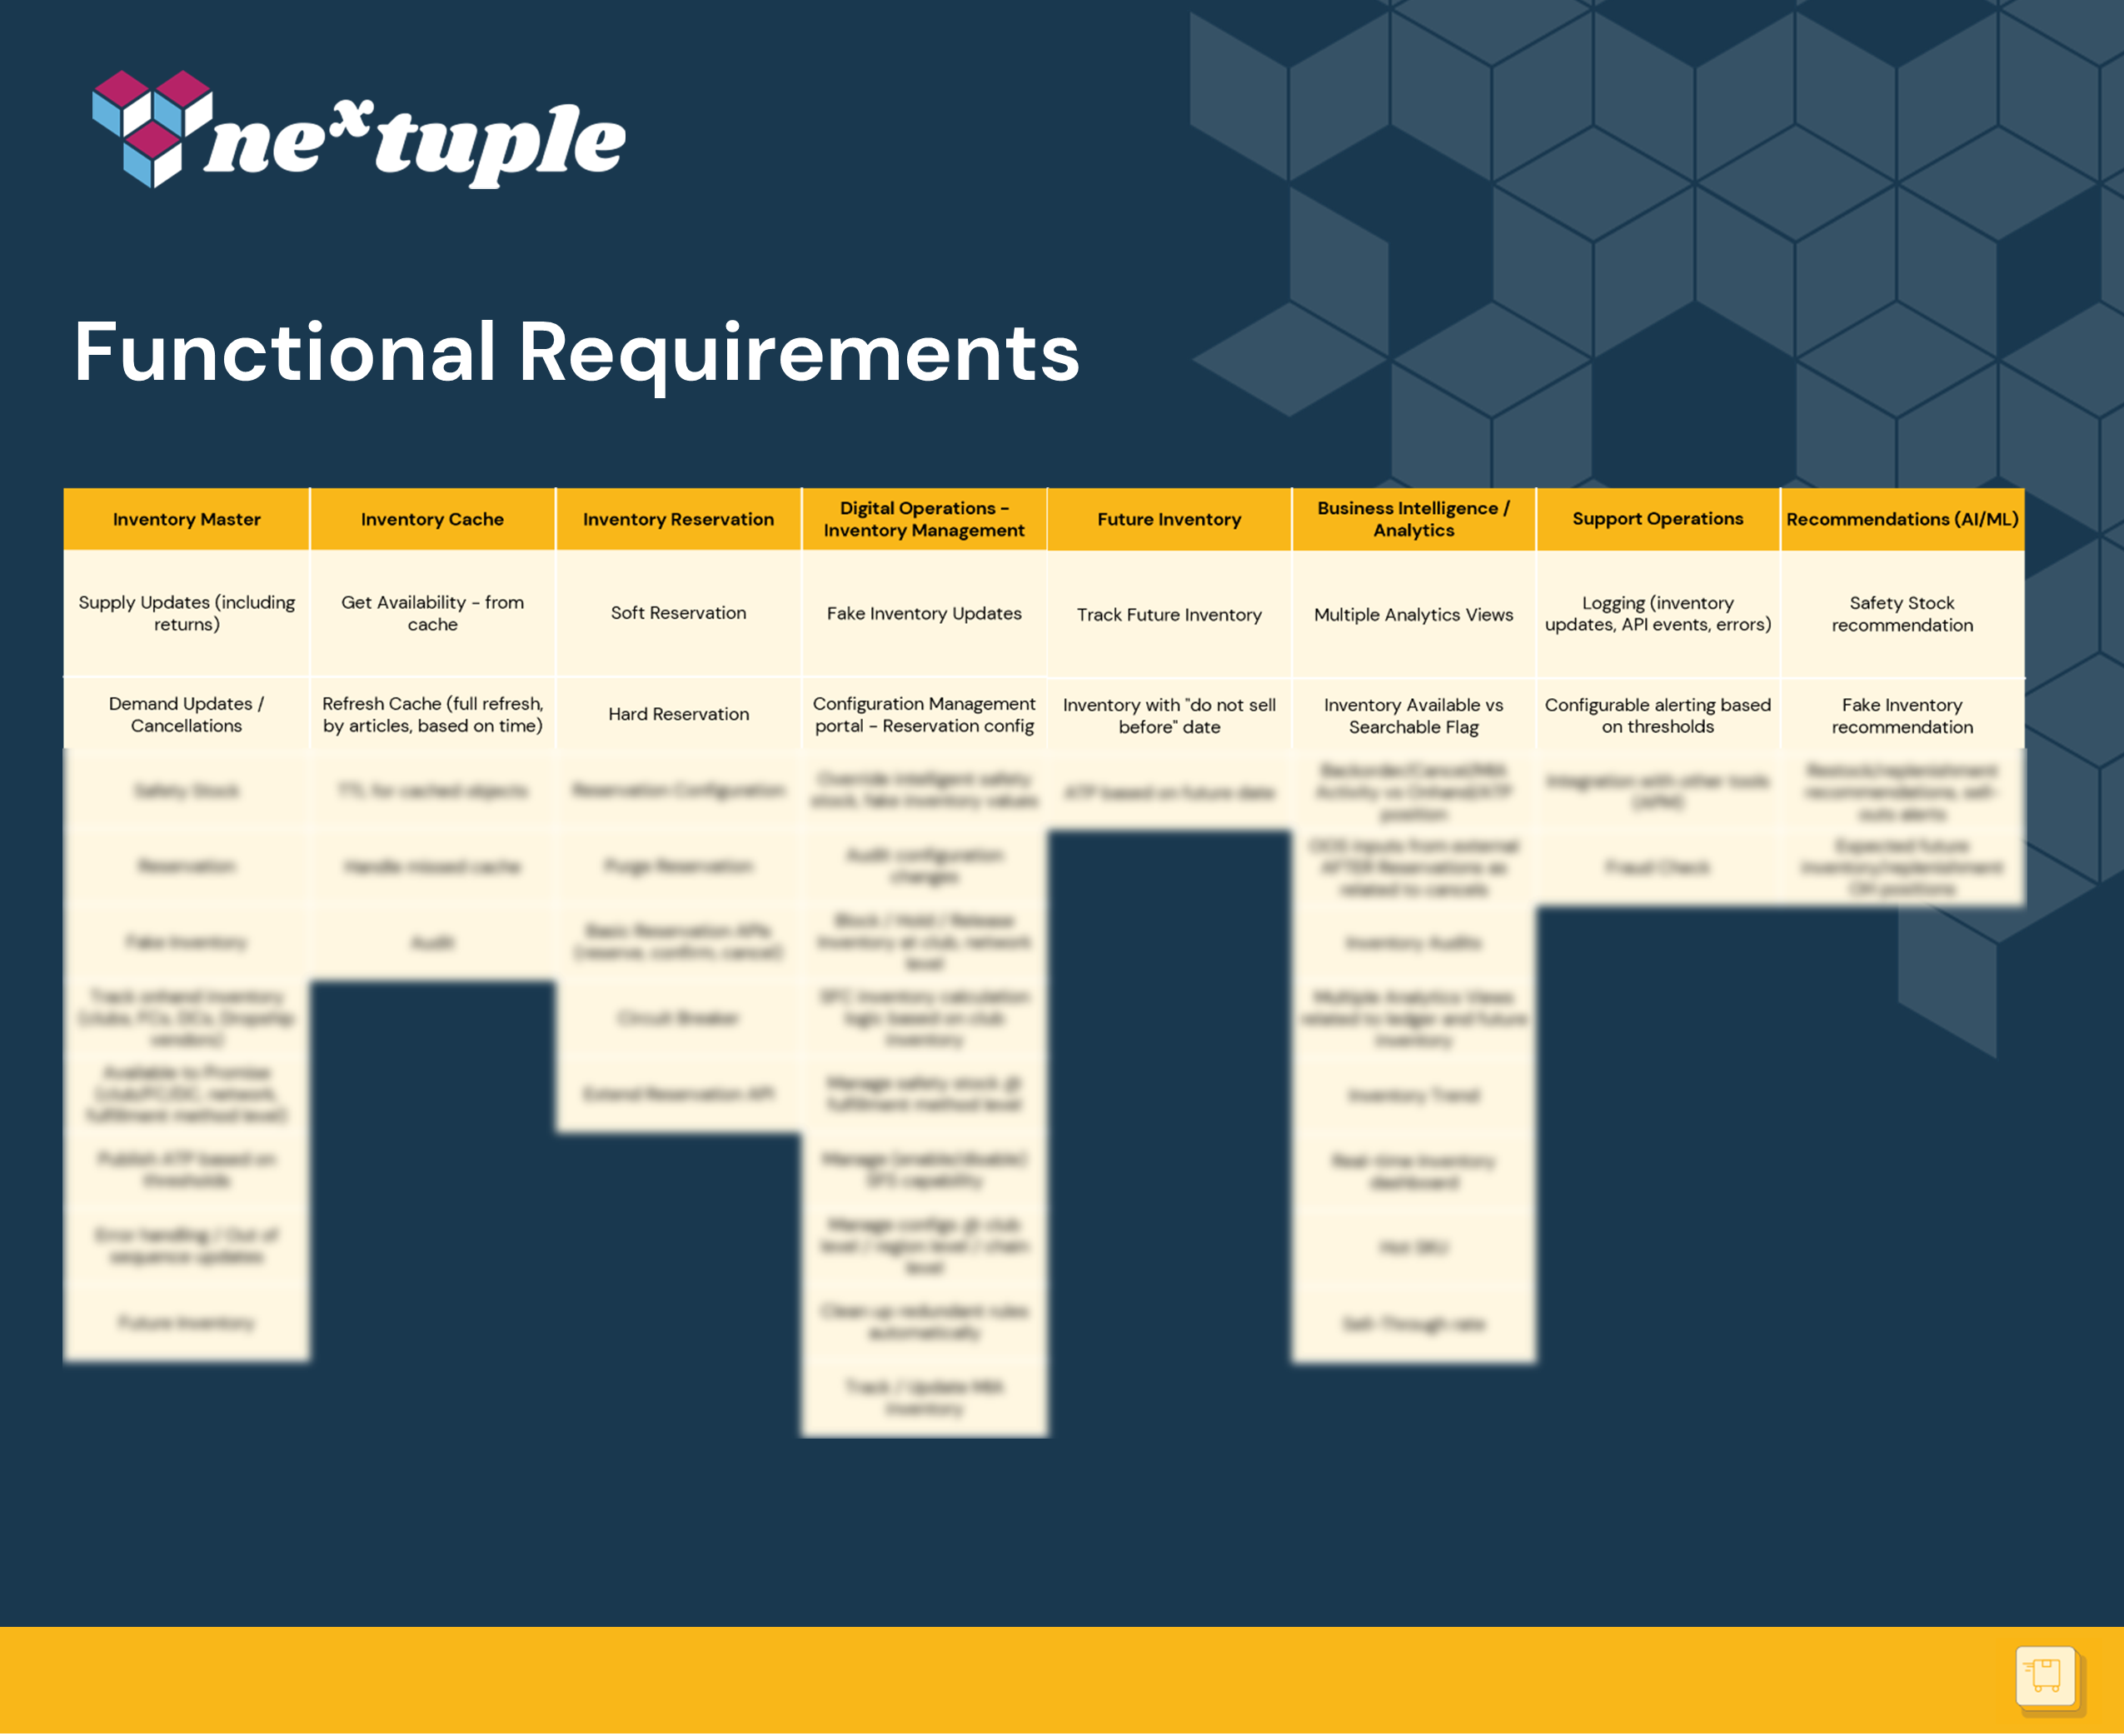 Functional Requirements Chart Blurred